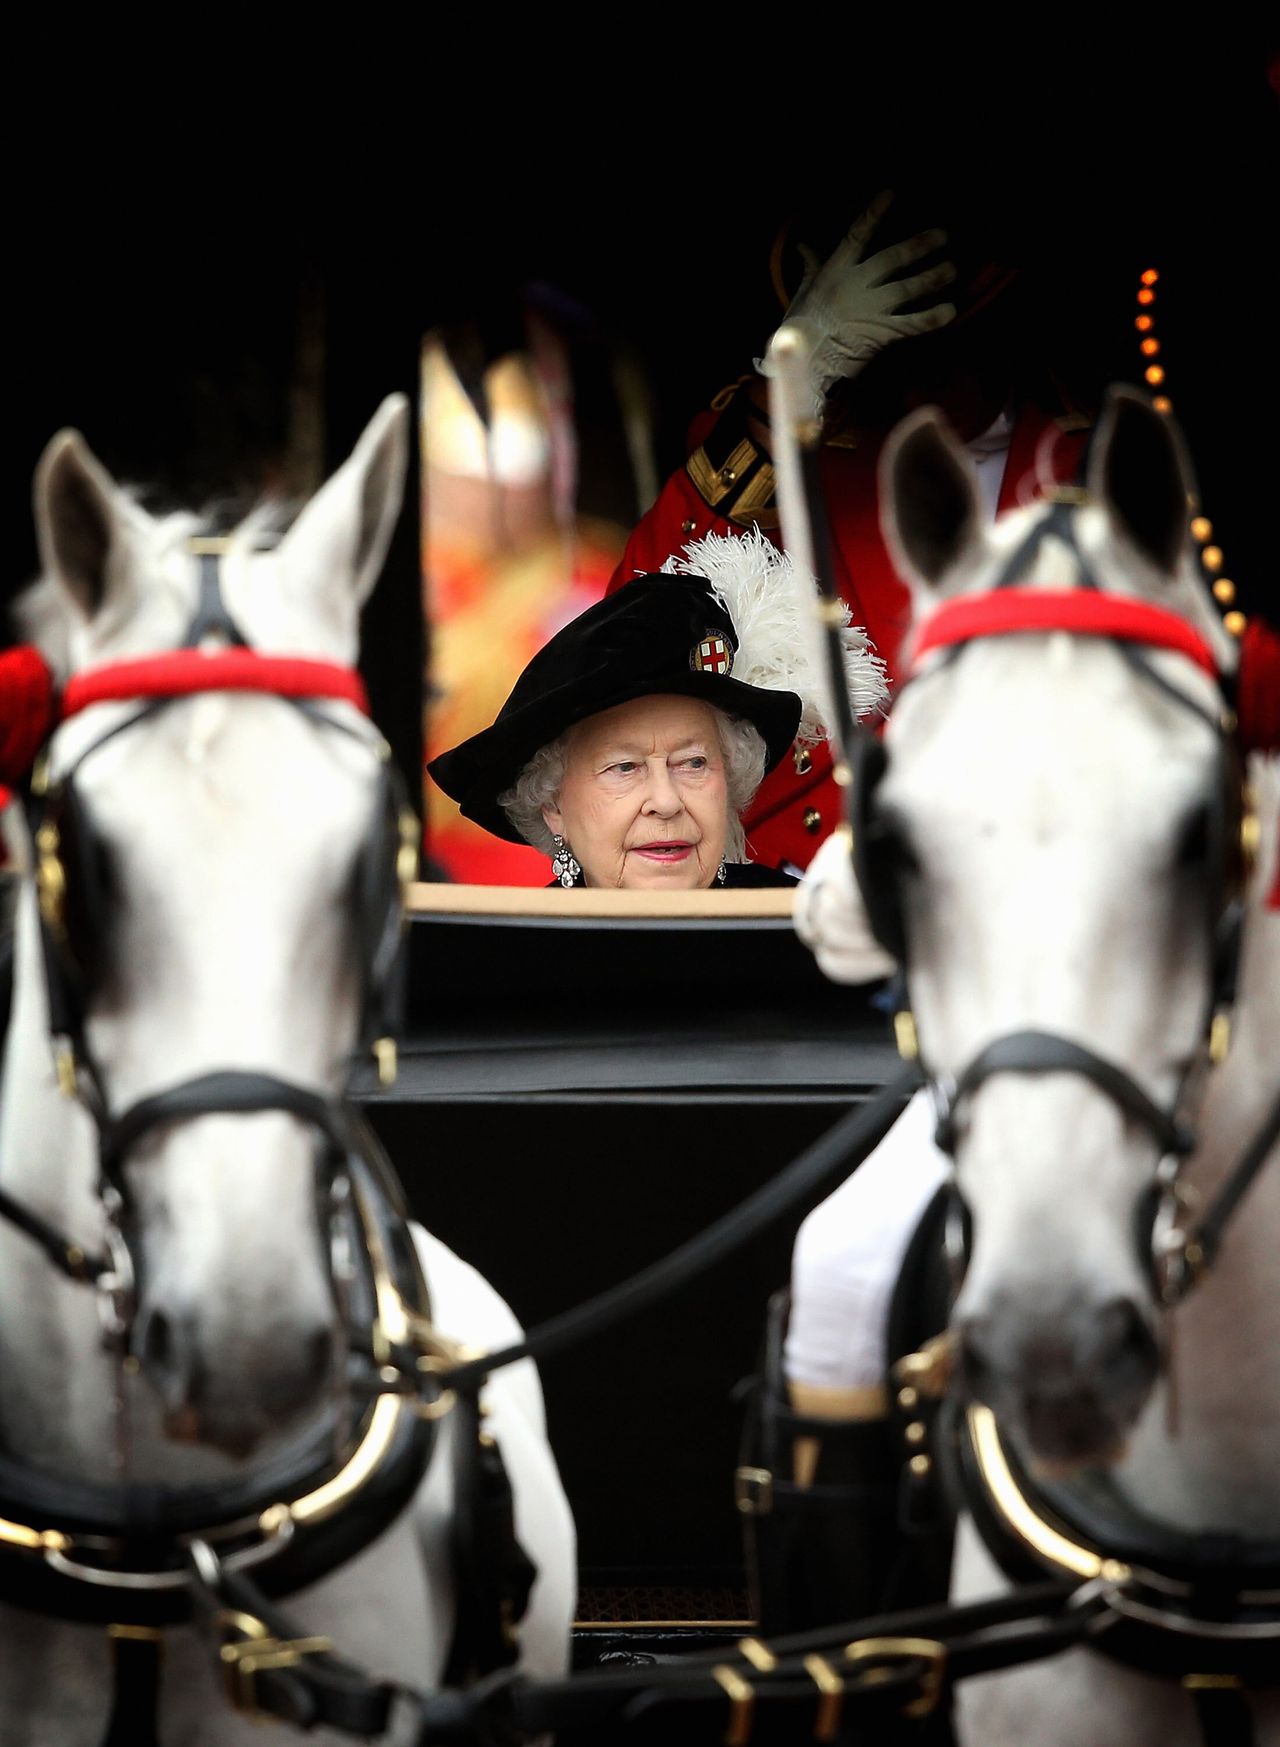 Queen Elizabeth II travels by carriage after the Most Noble Order of the Garter Ceremony on June 16, 2014 in Windsor, England.